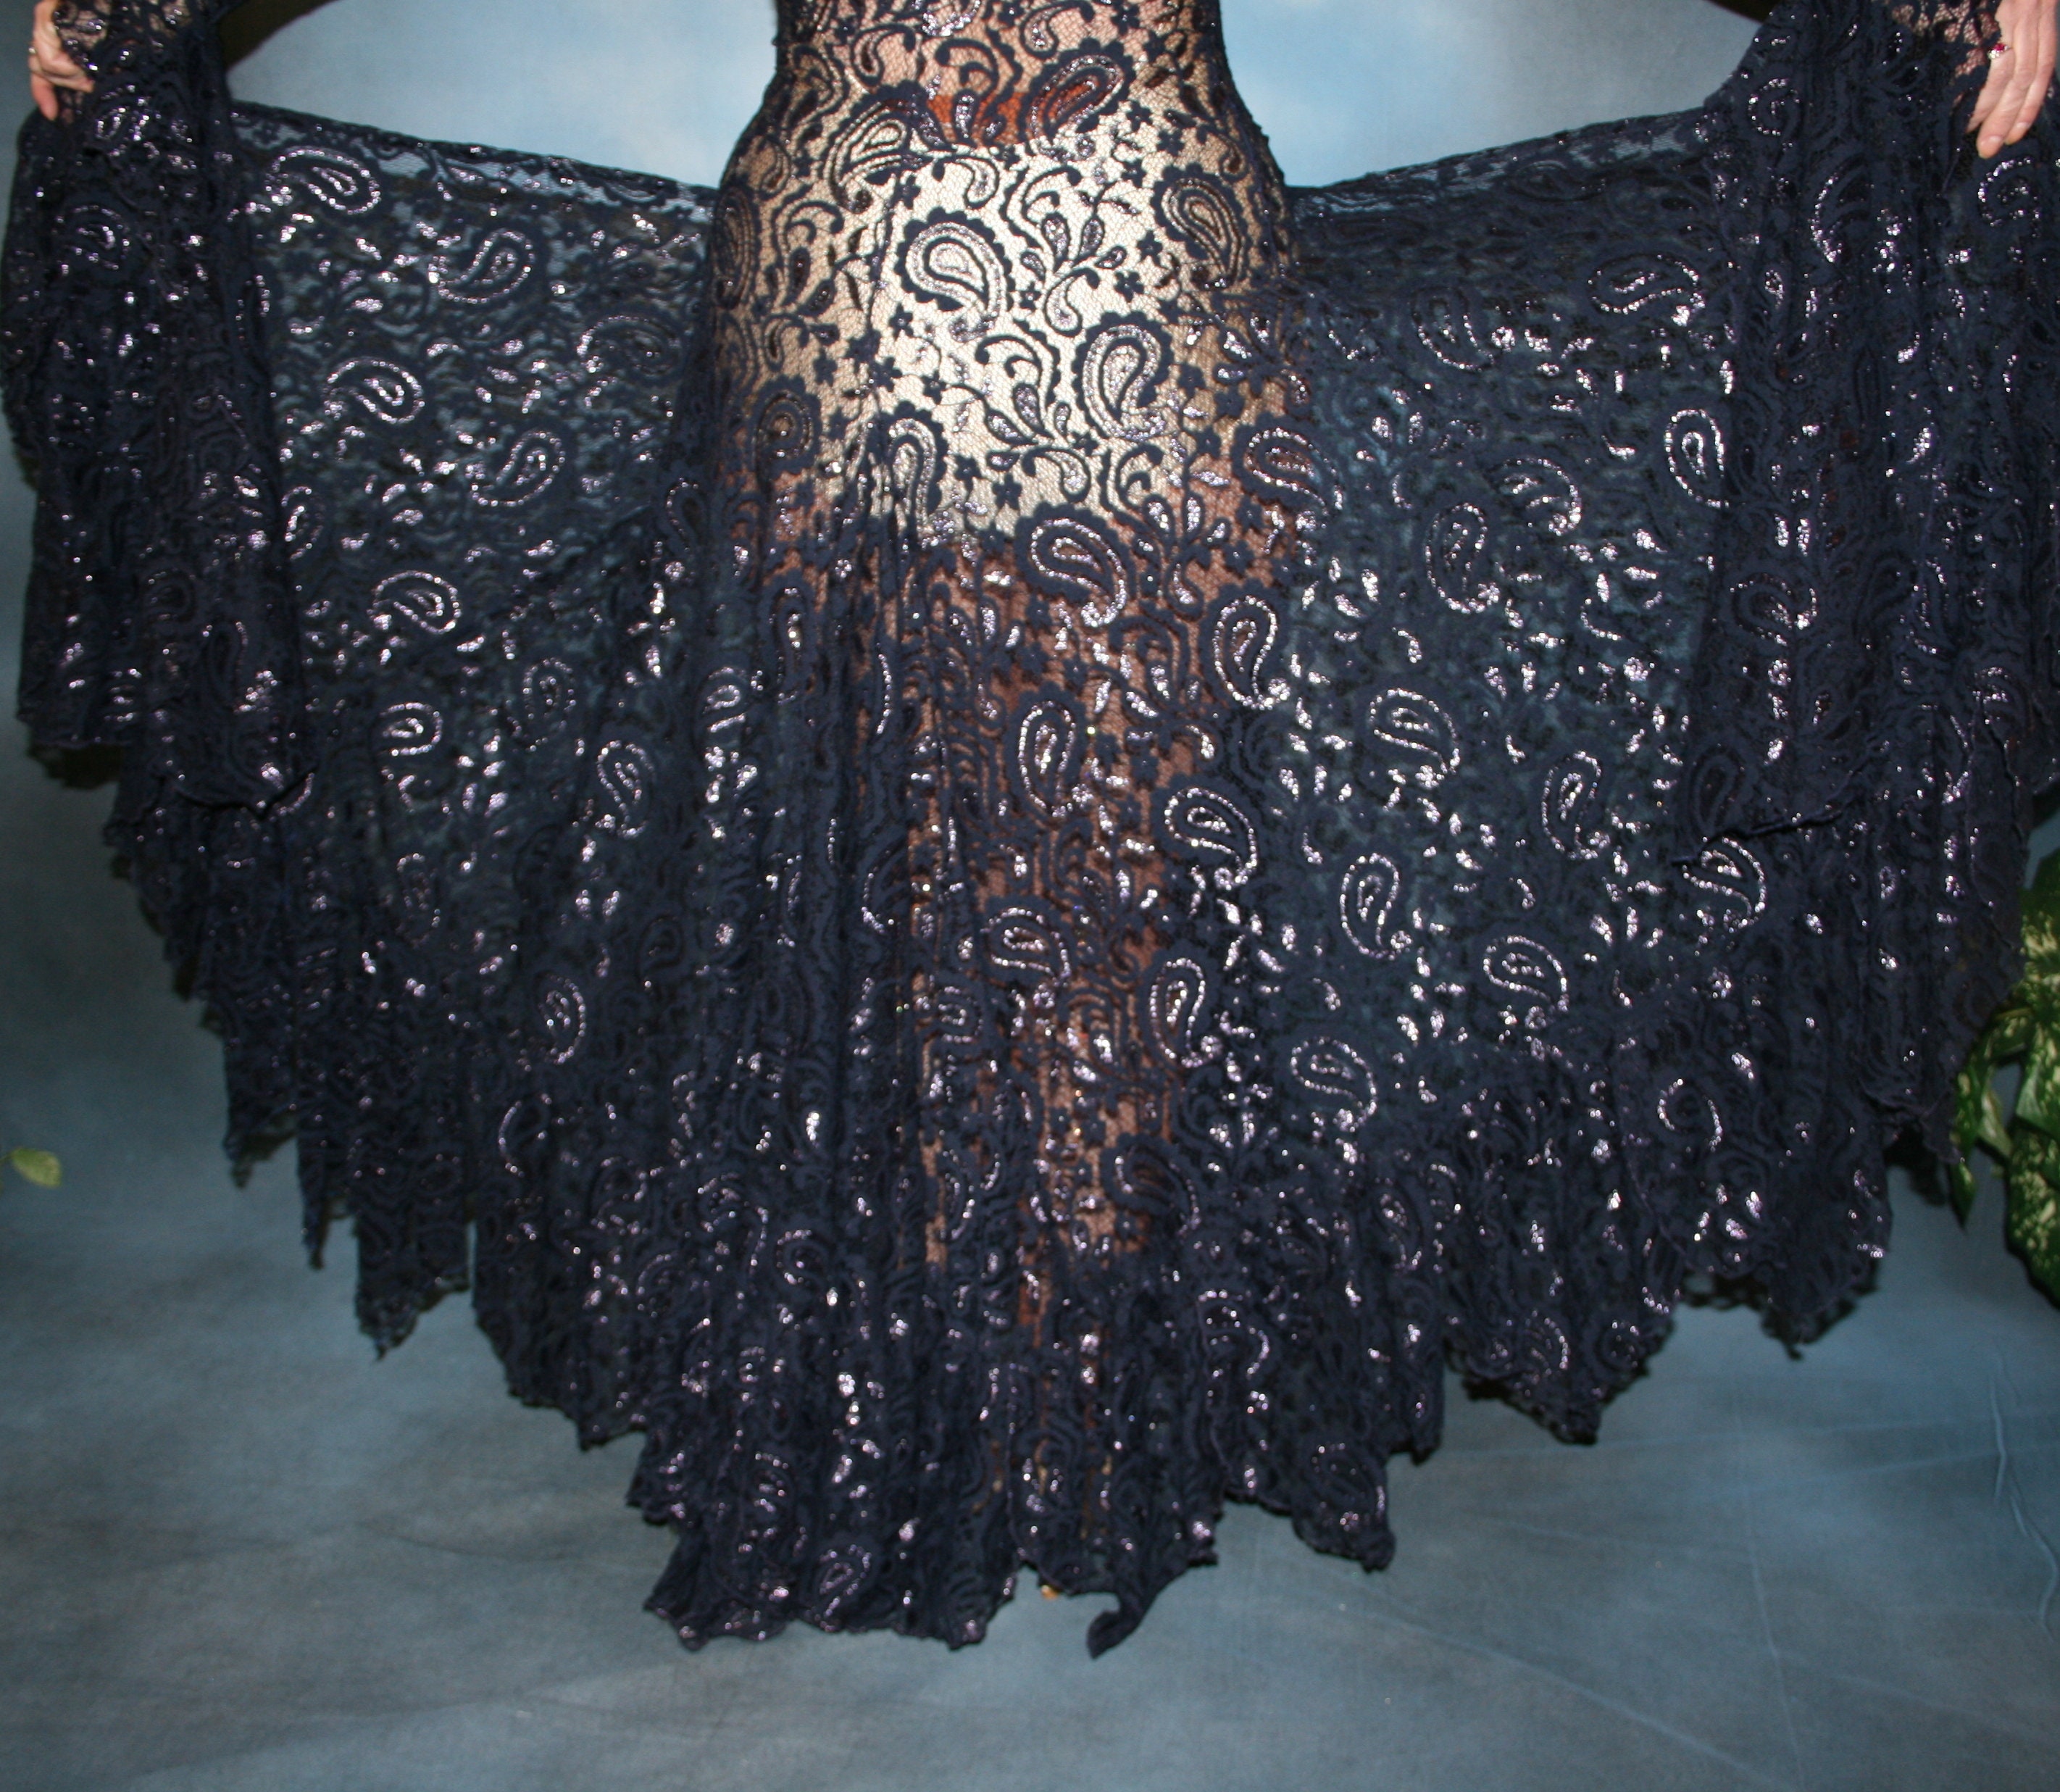 Captivating Tango Dress: Open Shoulders & Intricate Lacing